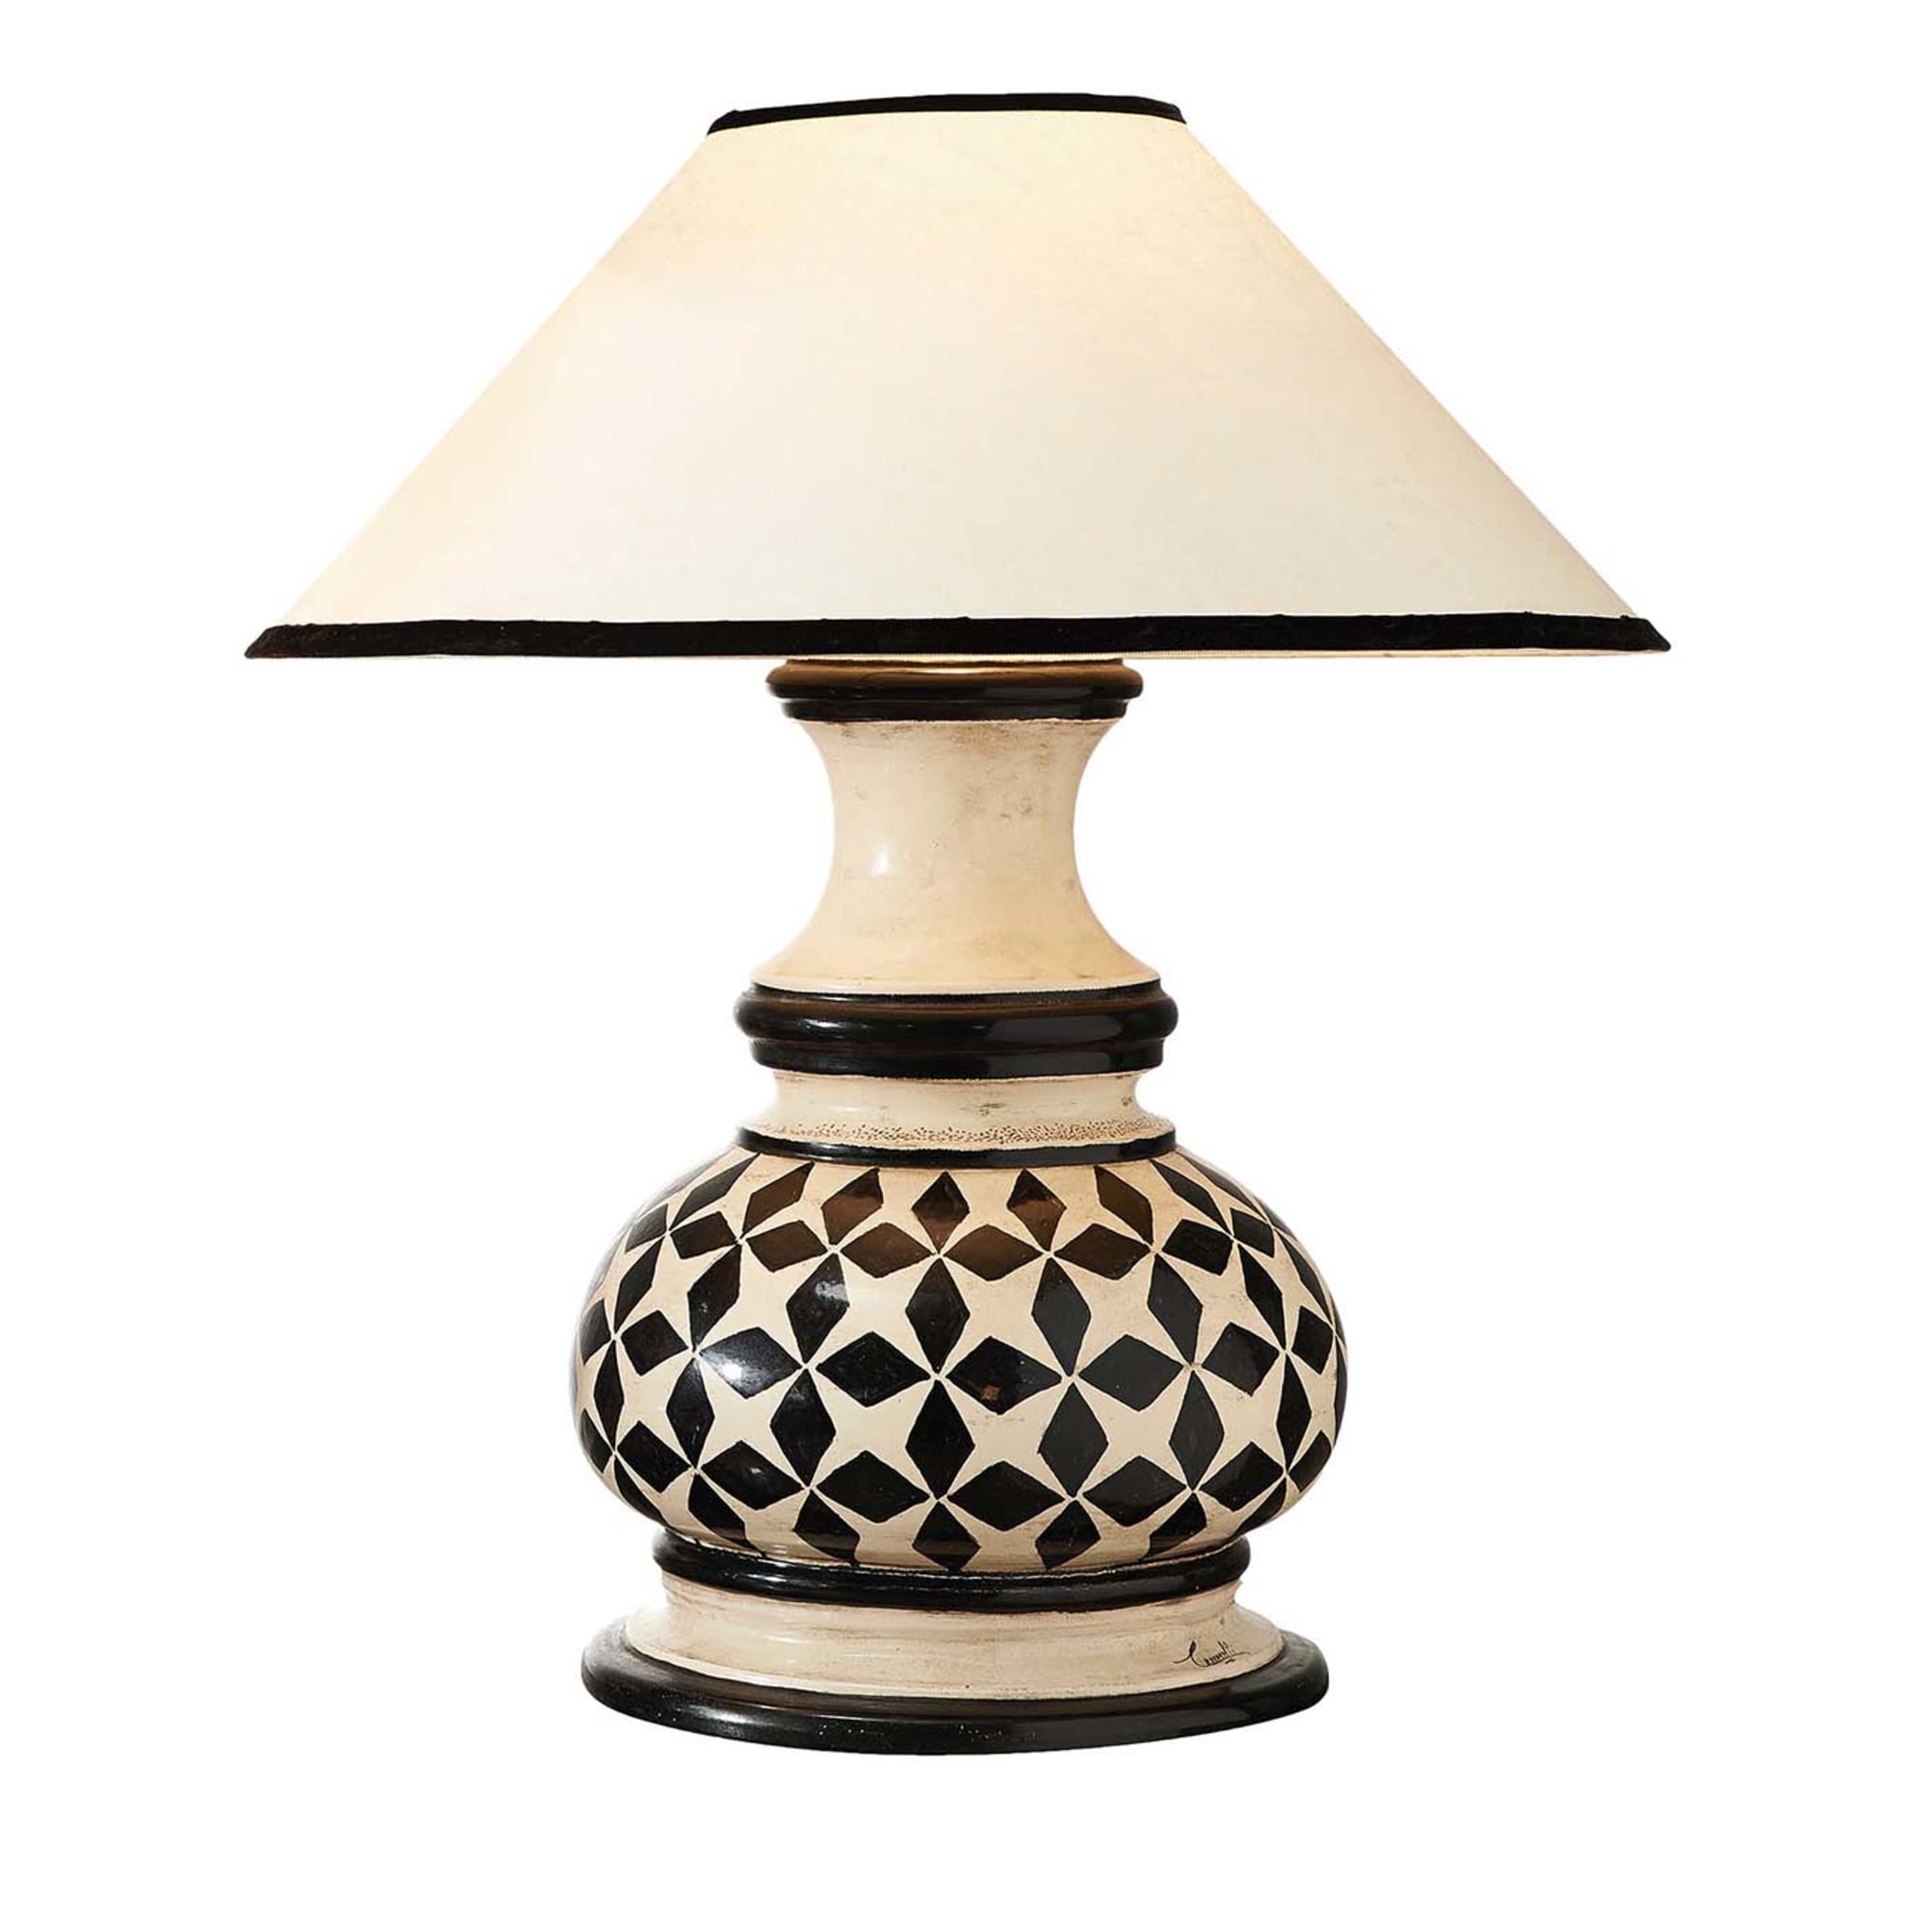 Fred Stelle Nere Table Lamp - Main view